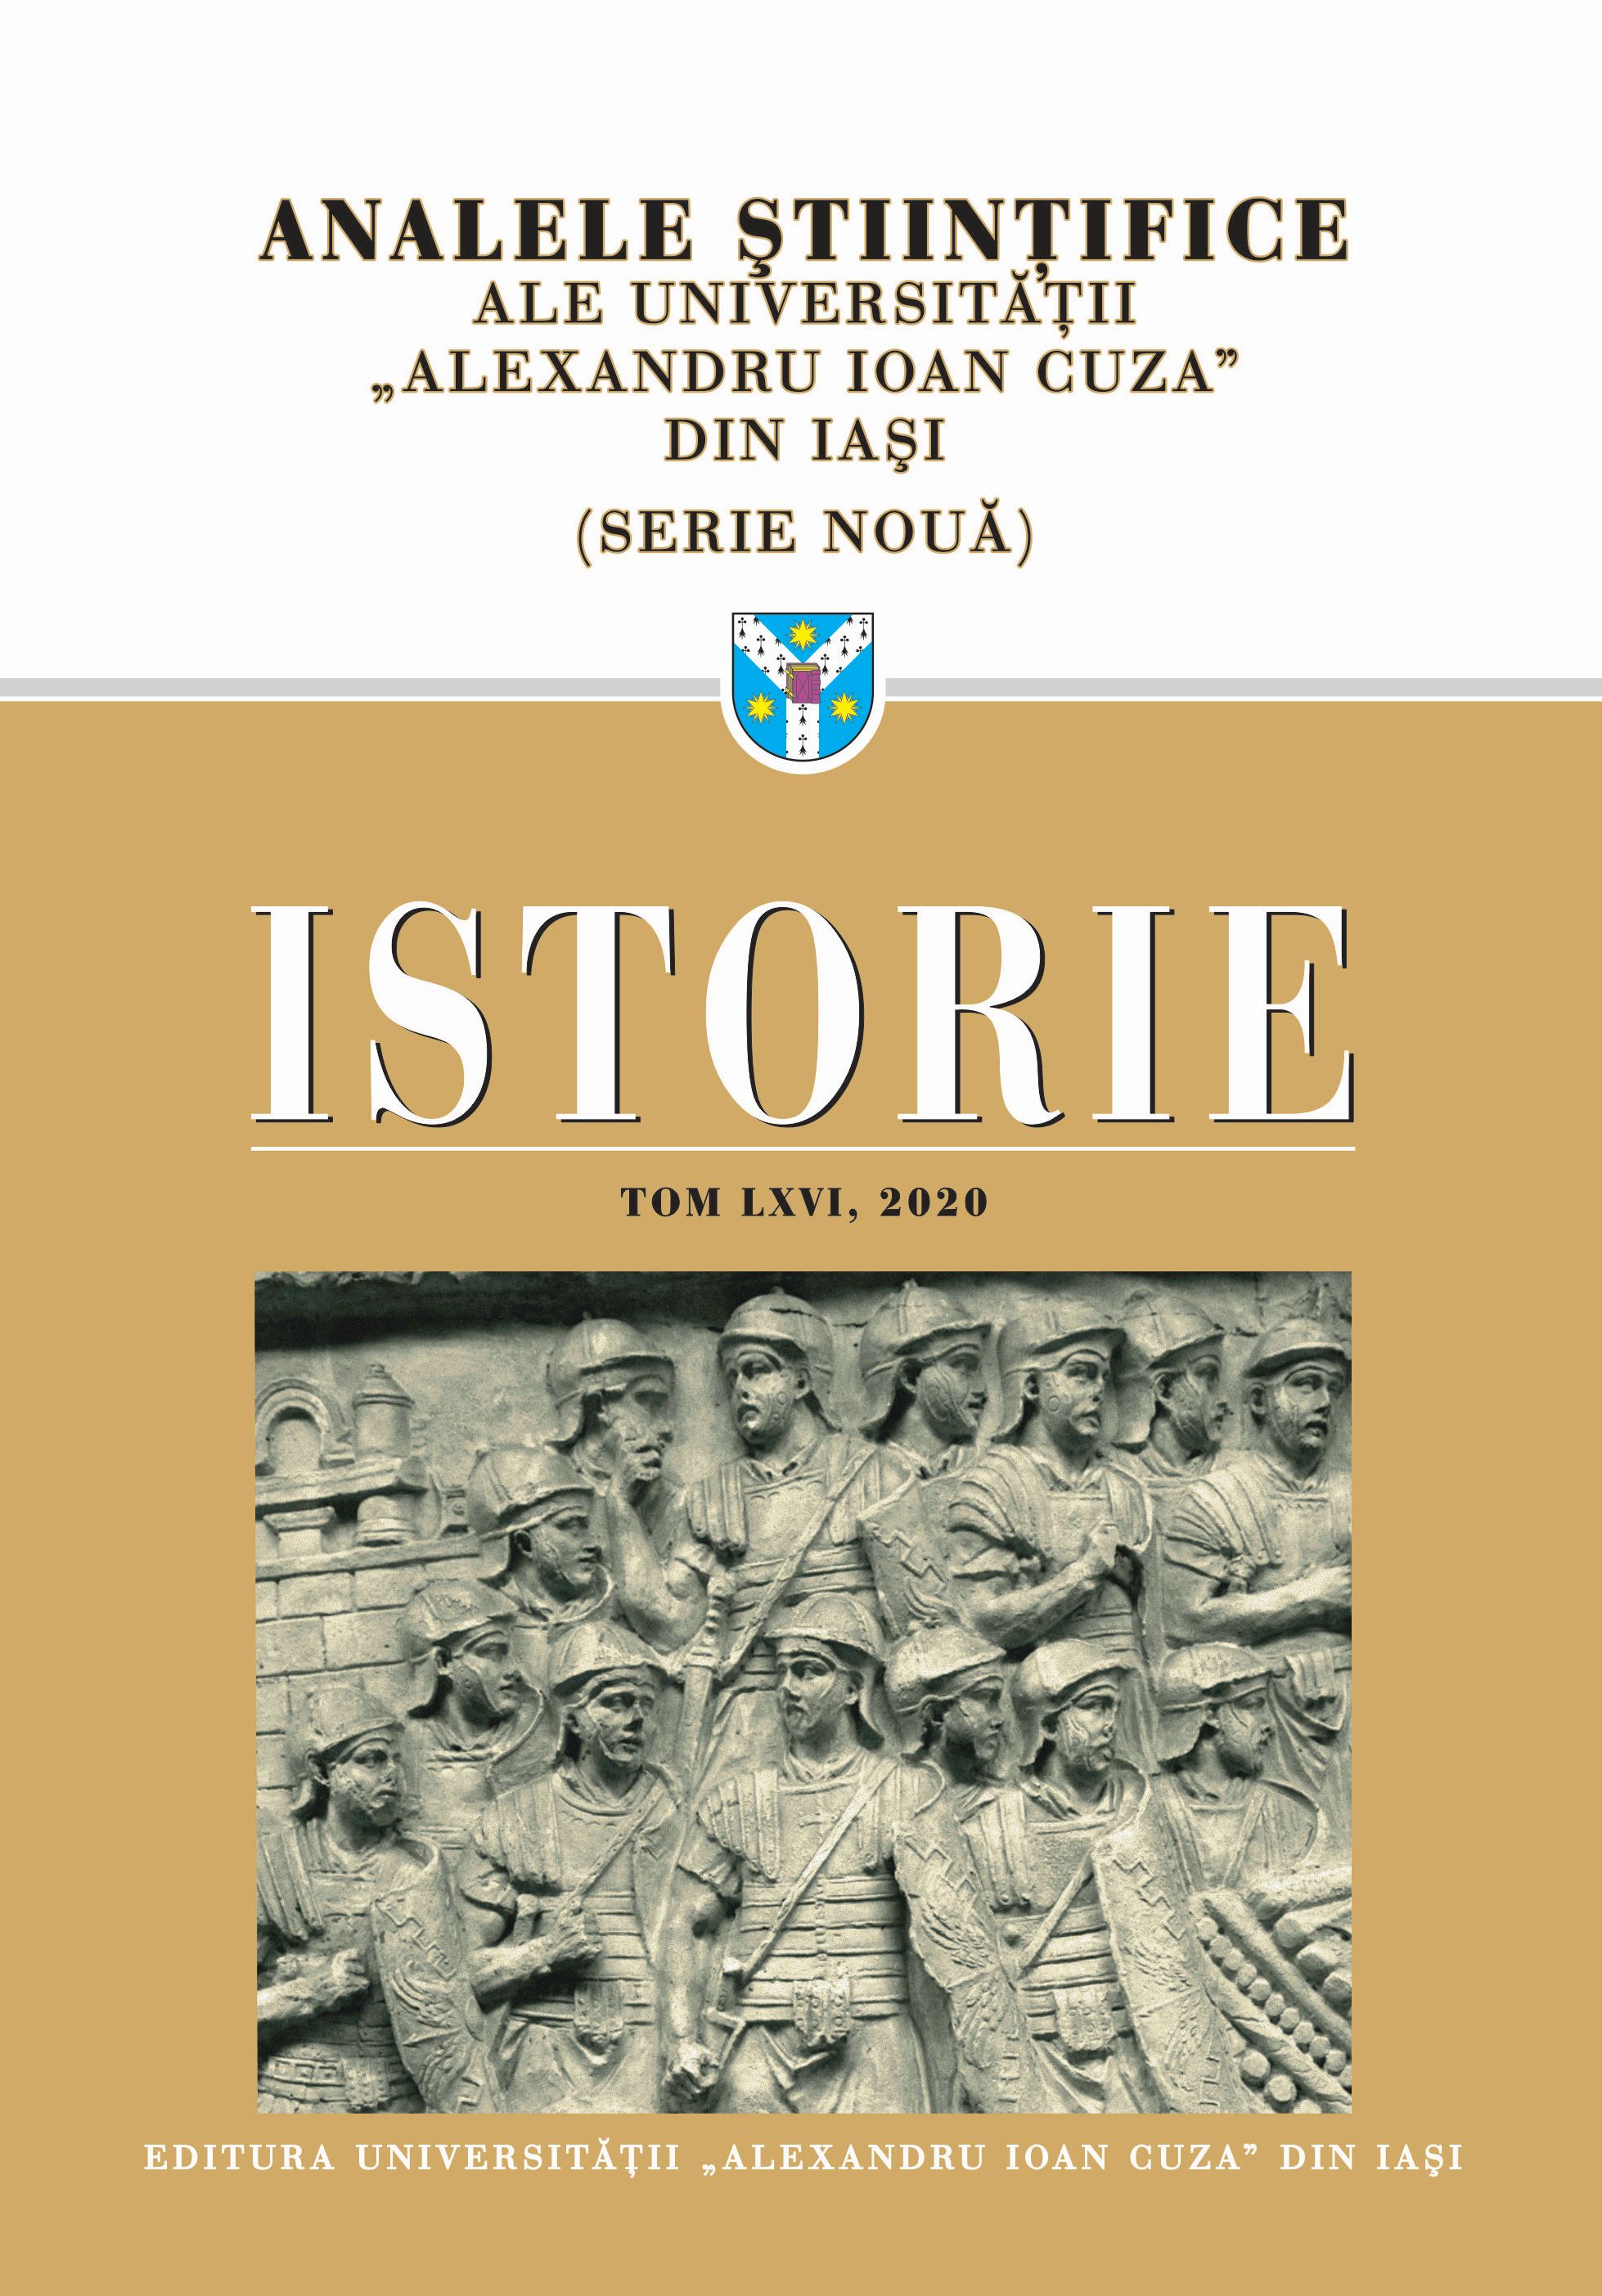 Remembering the Romanian war: the refugees and their memoirs from Moldavia (1916-1918)